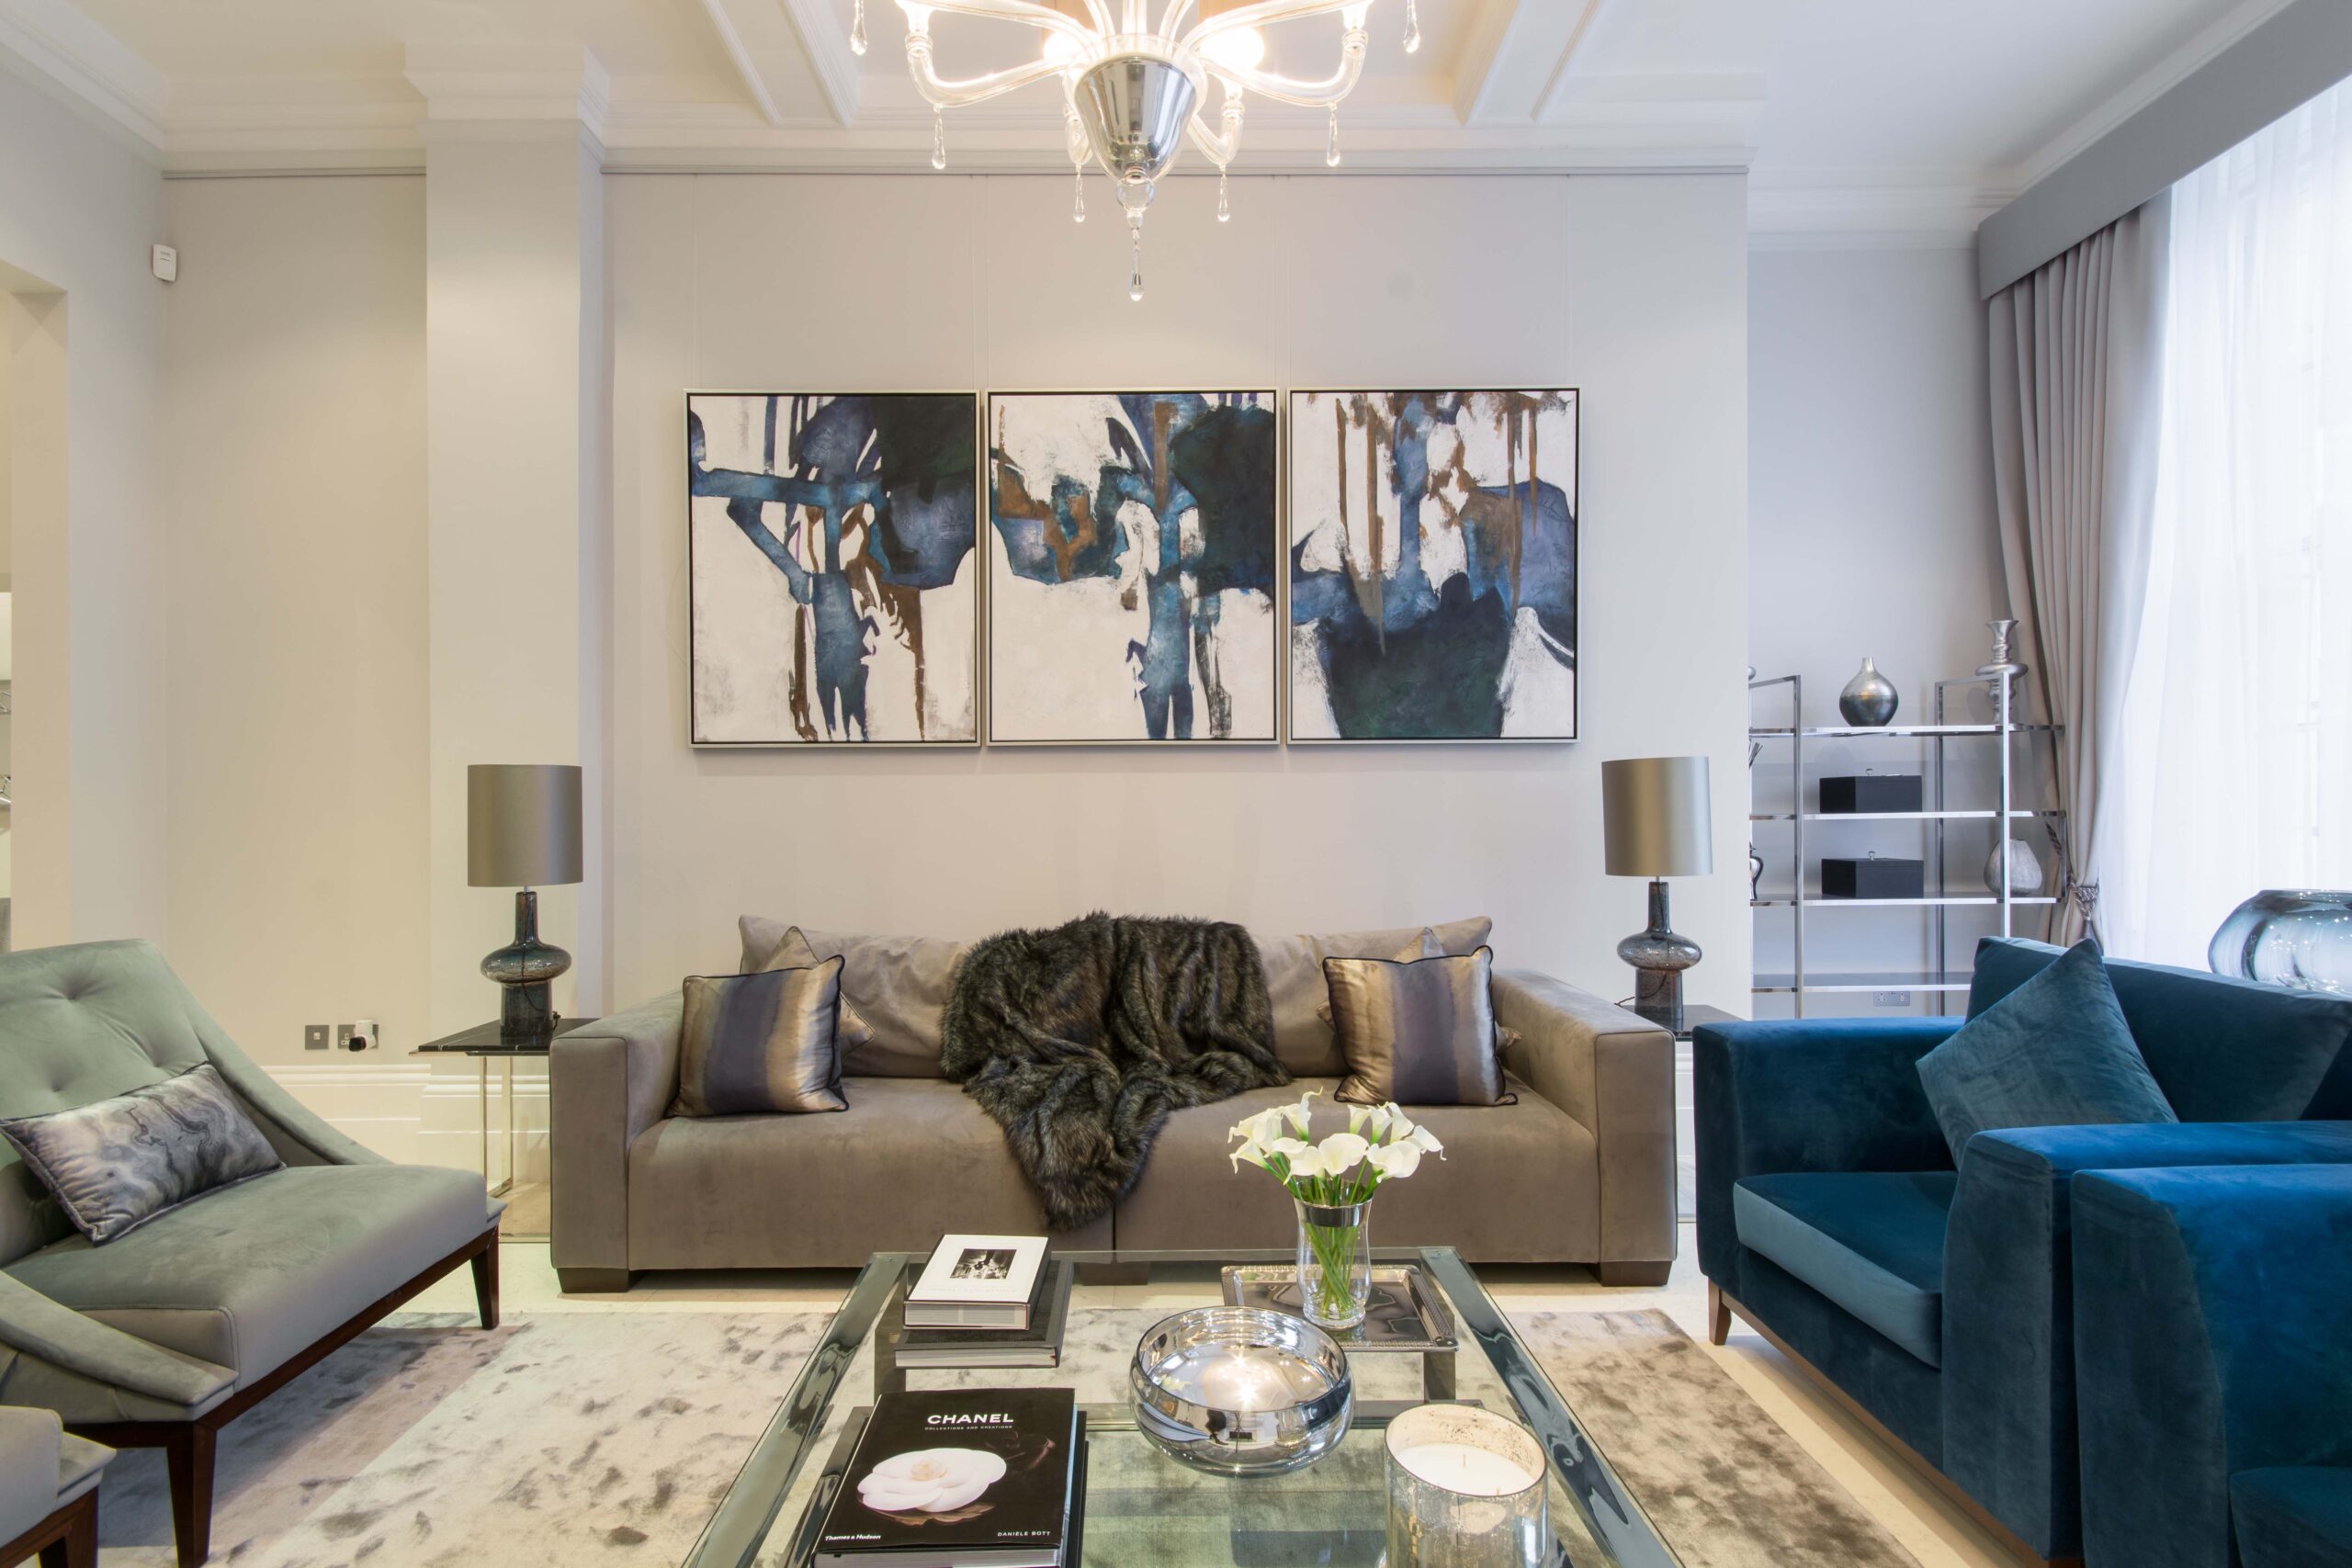 Luxury open-plan reception room of a maisonette for rent in Bayswater